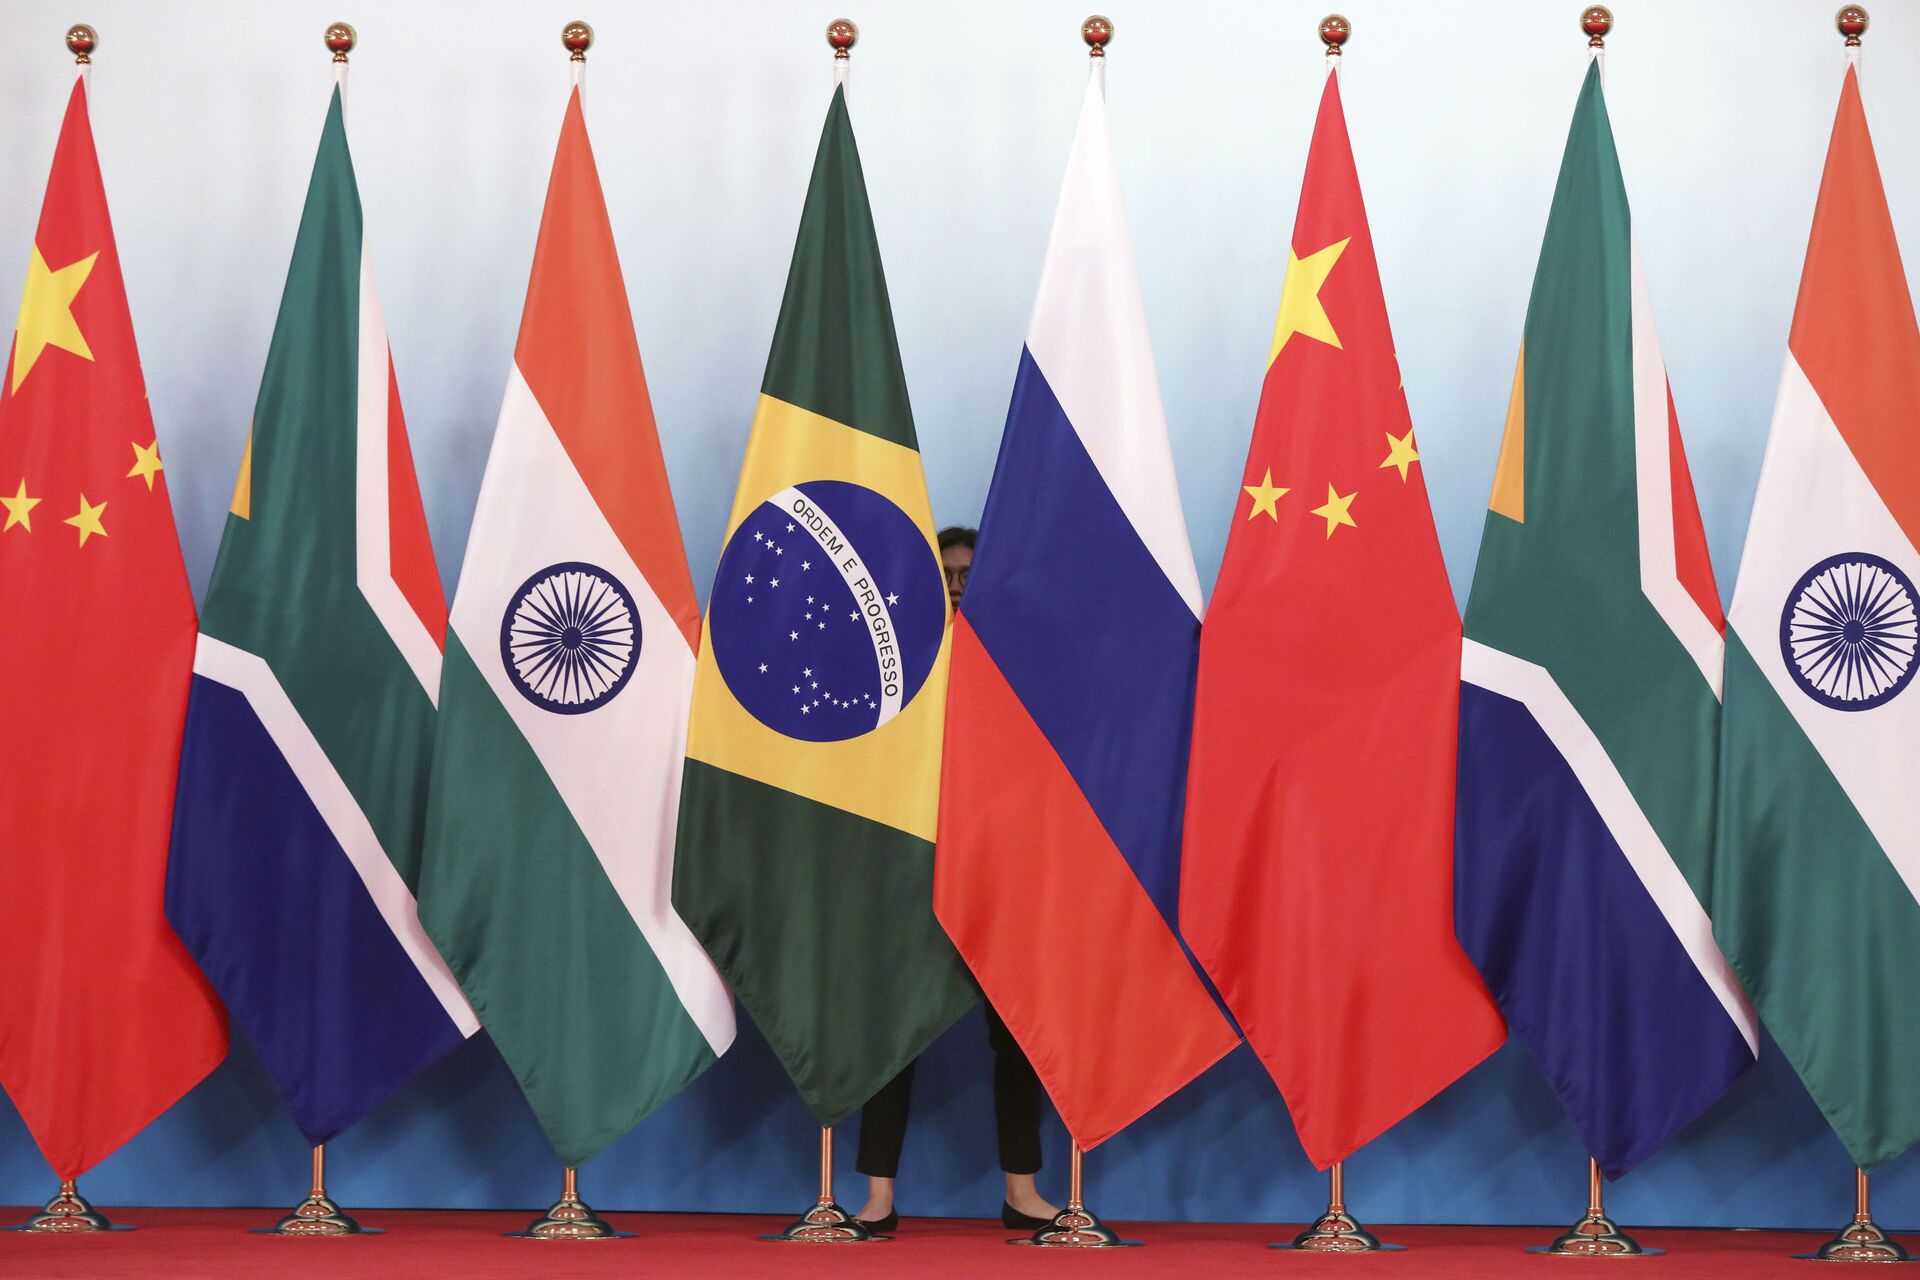 Staff worker stands behinds national flags of Brazil, Russia, China, South Africa and India to tidy the flags ahead of a group photo during the BRICS Summit at the Xiamen International Conference and Exhibition Center in Xiamen, southeastern China's Fujian Province, Monday, Sept. 4, 2017. - Sputnik International, 1920, 27.02.2022